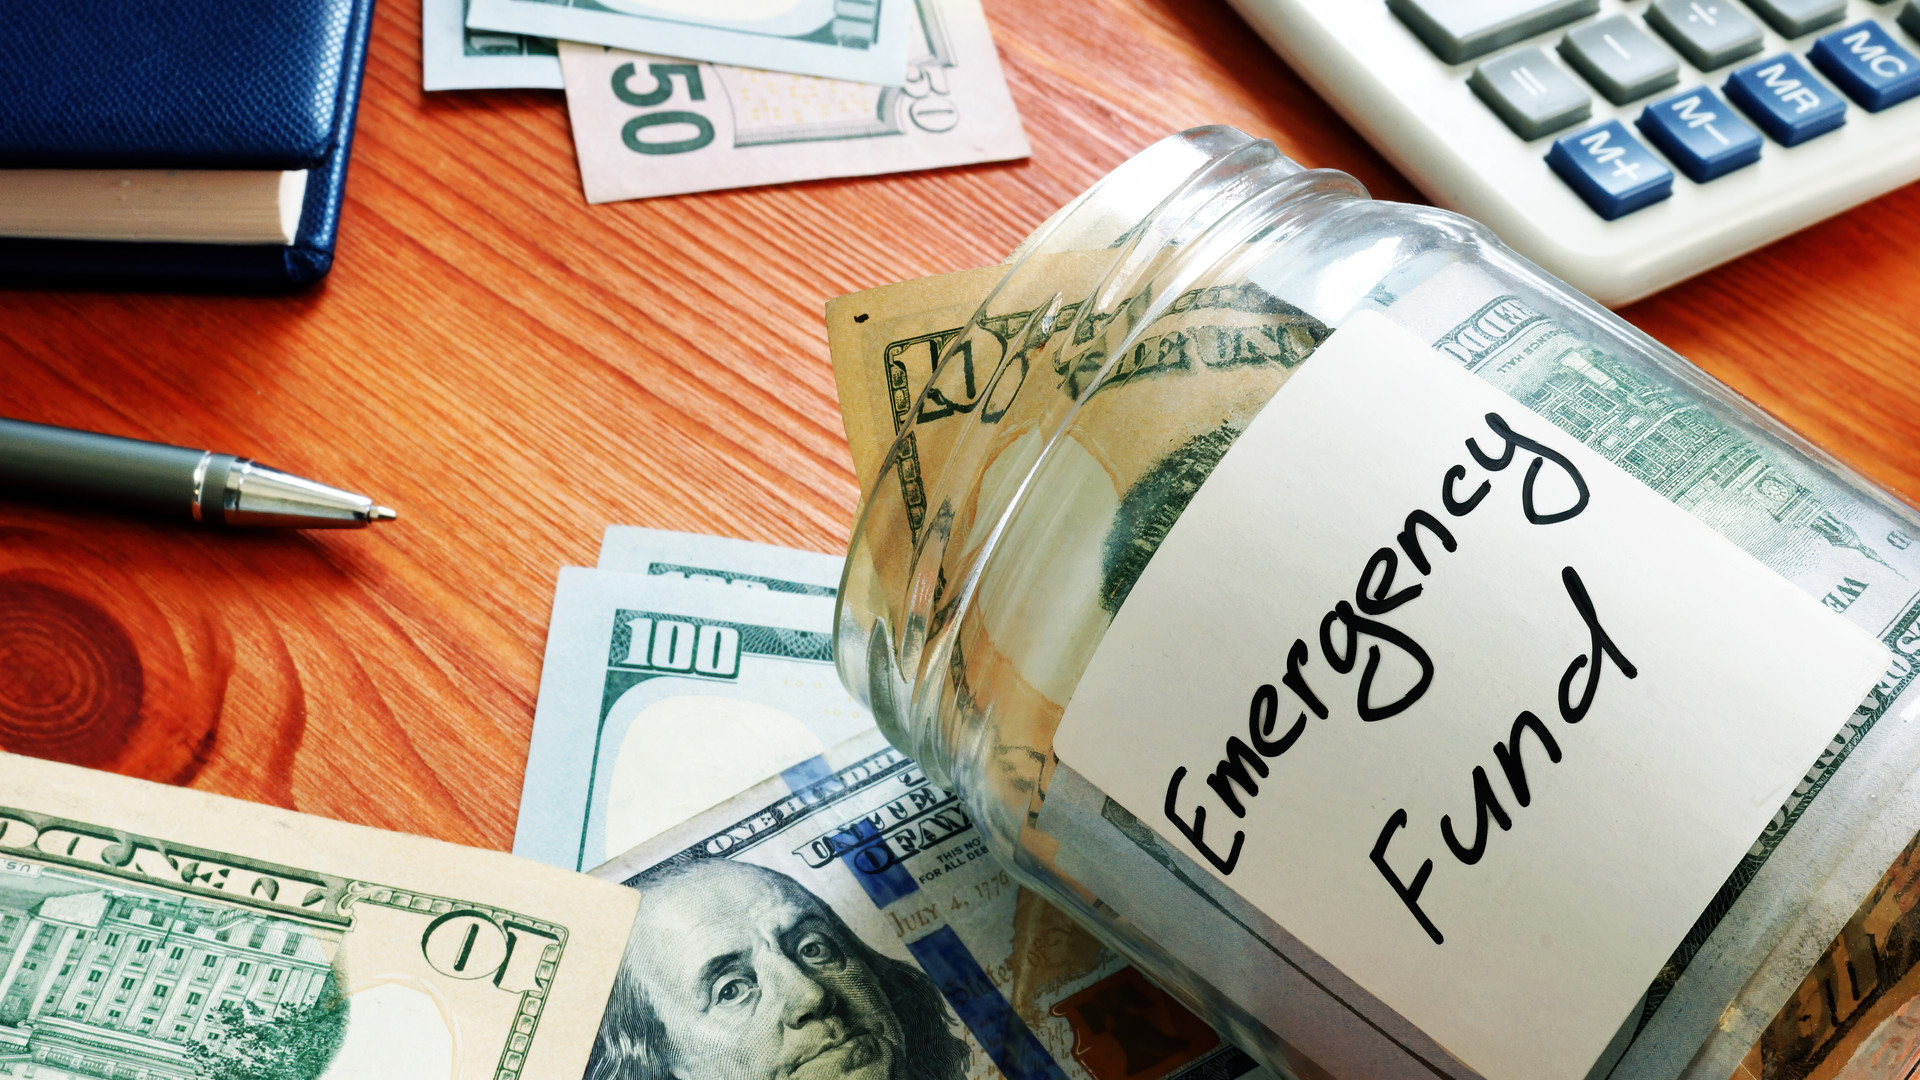 Emergency fund in the glass jar with cash.